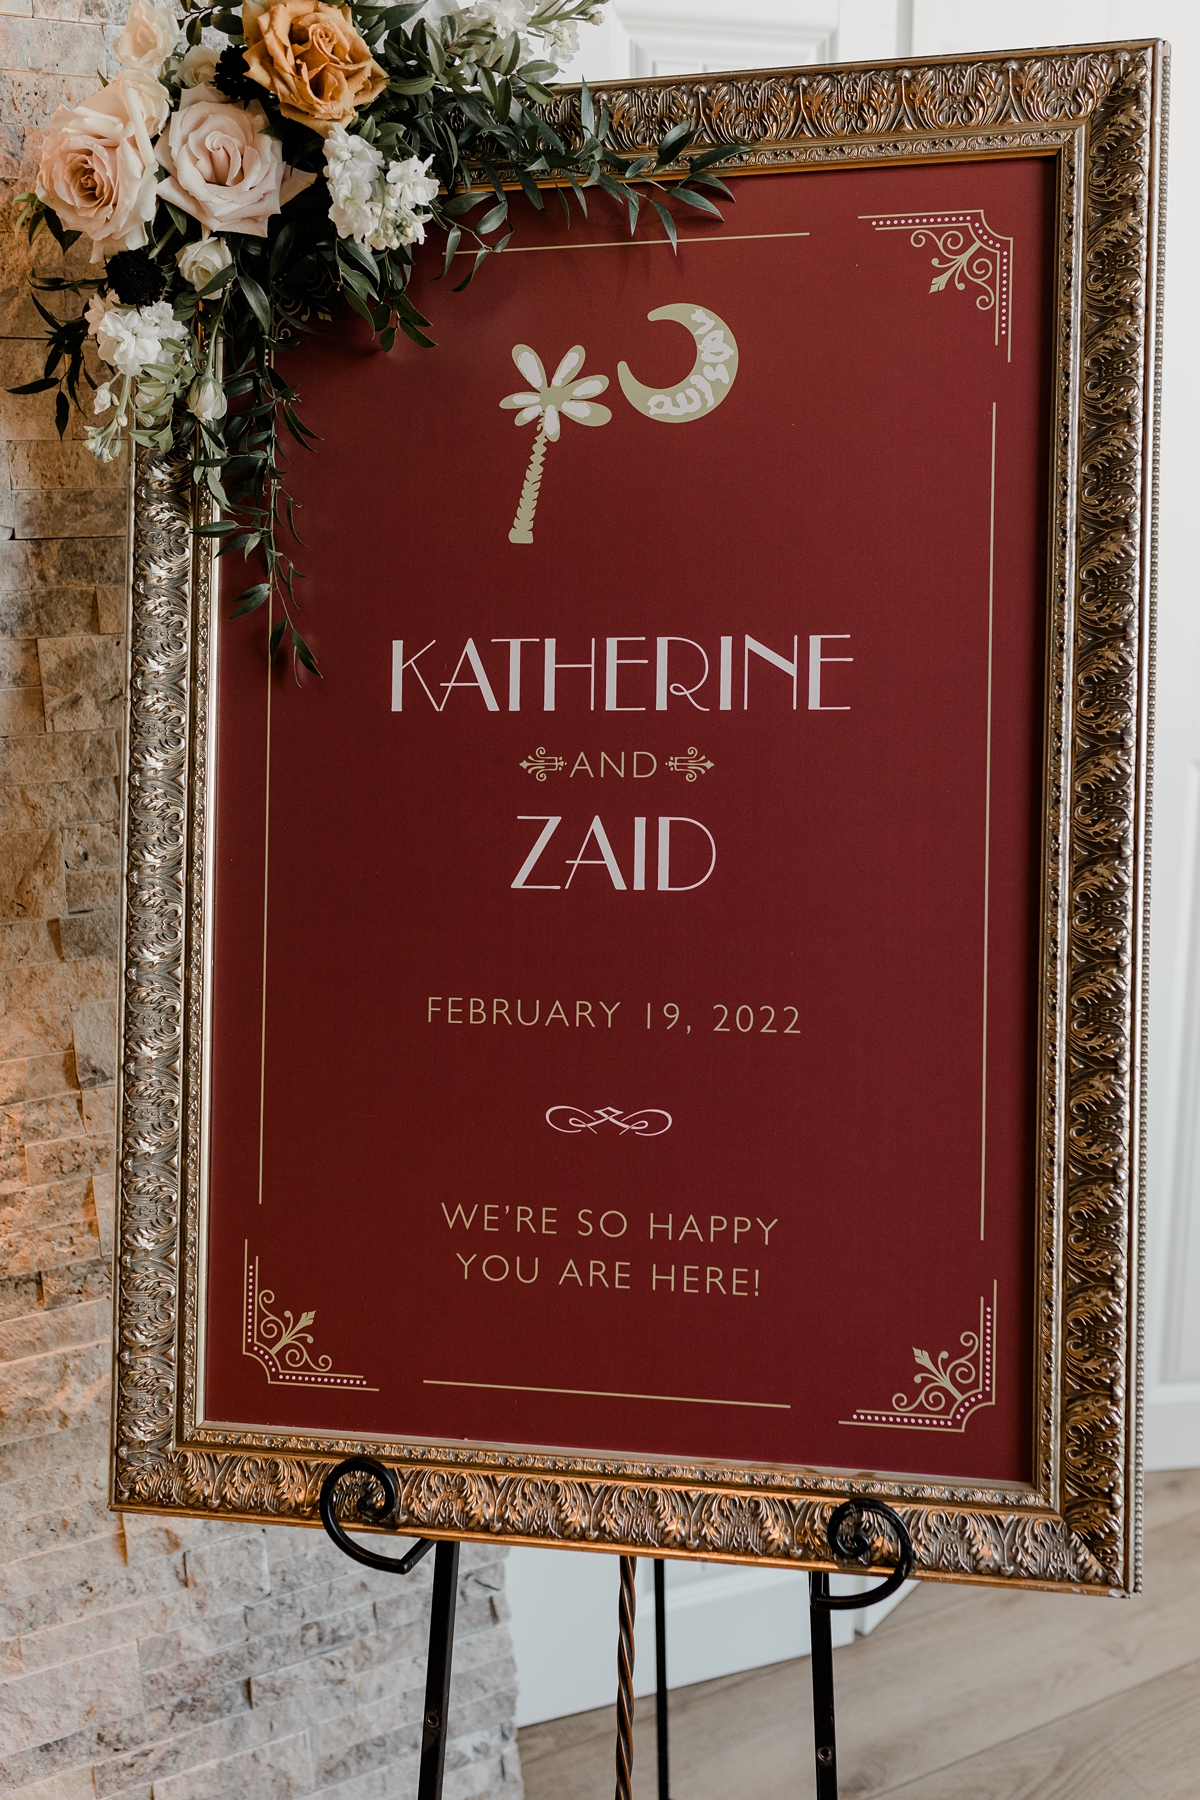 Wedding reception maroon red and gold framed sign